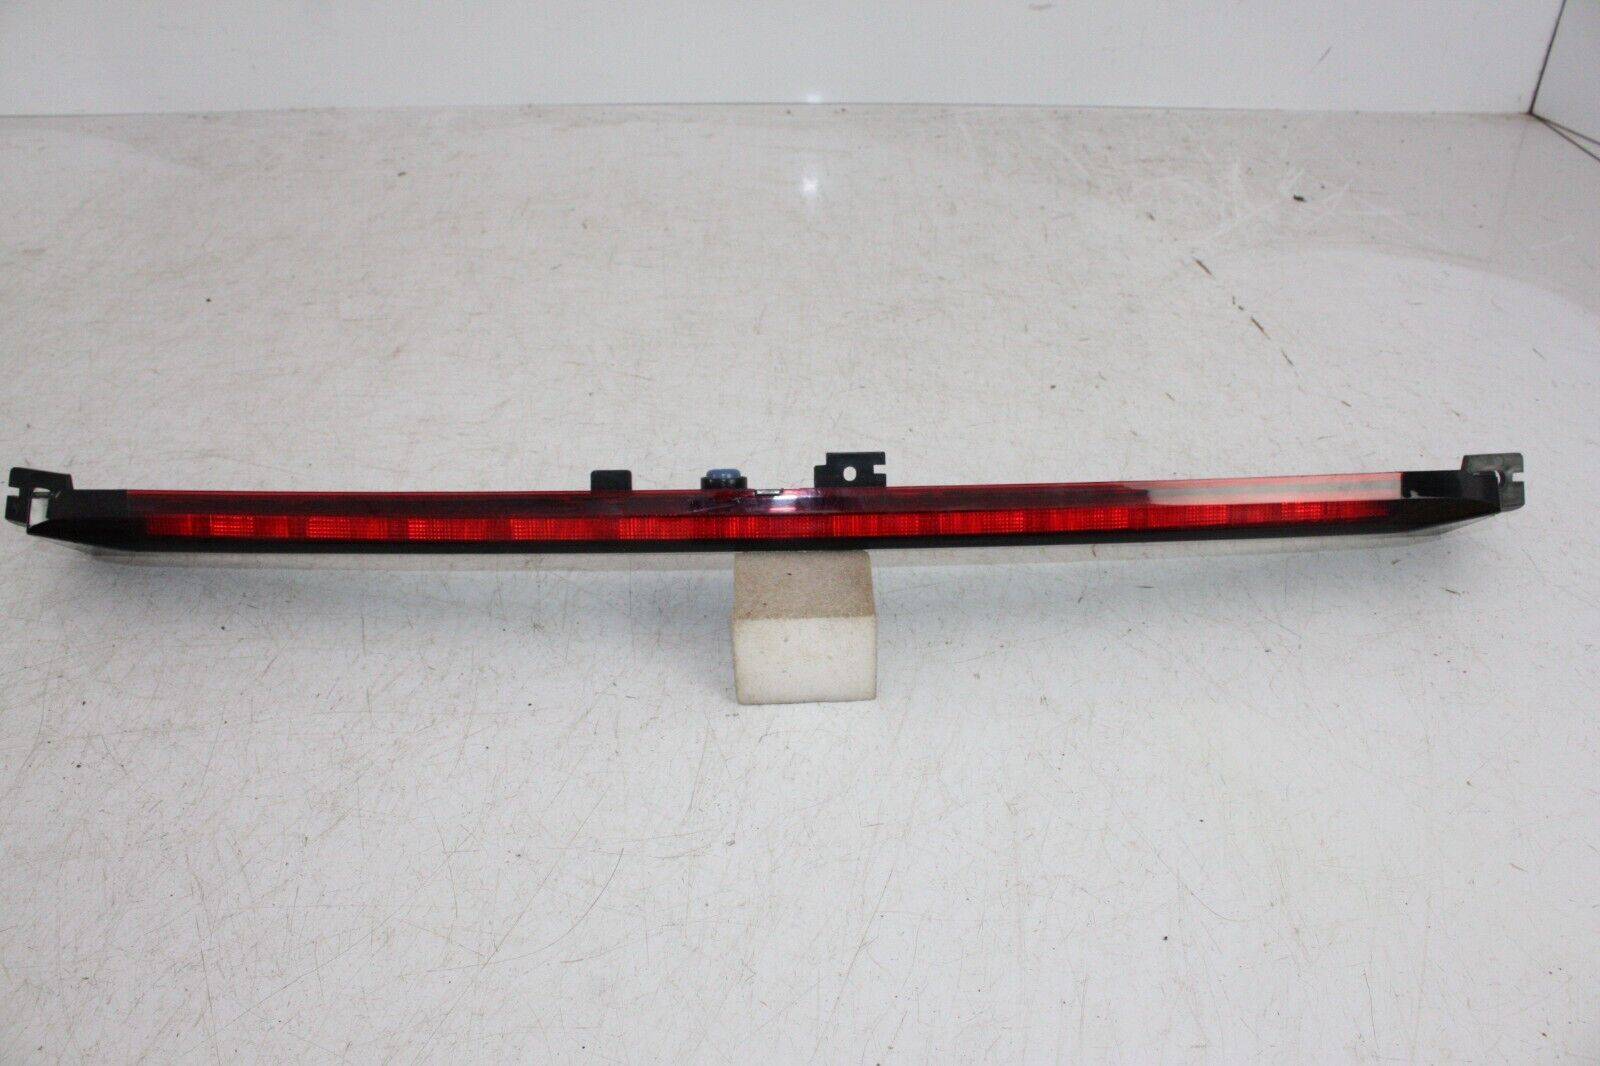 VOLVO-XC90-REAR-HIGH-MOUNT-TAILGATE-STOP-LAMP-LIGHT-2015-ON-31353169-175429934723